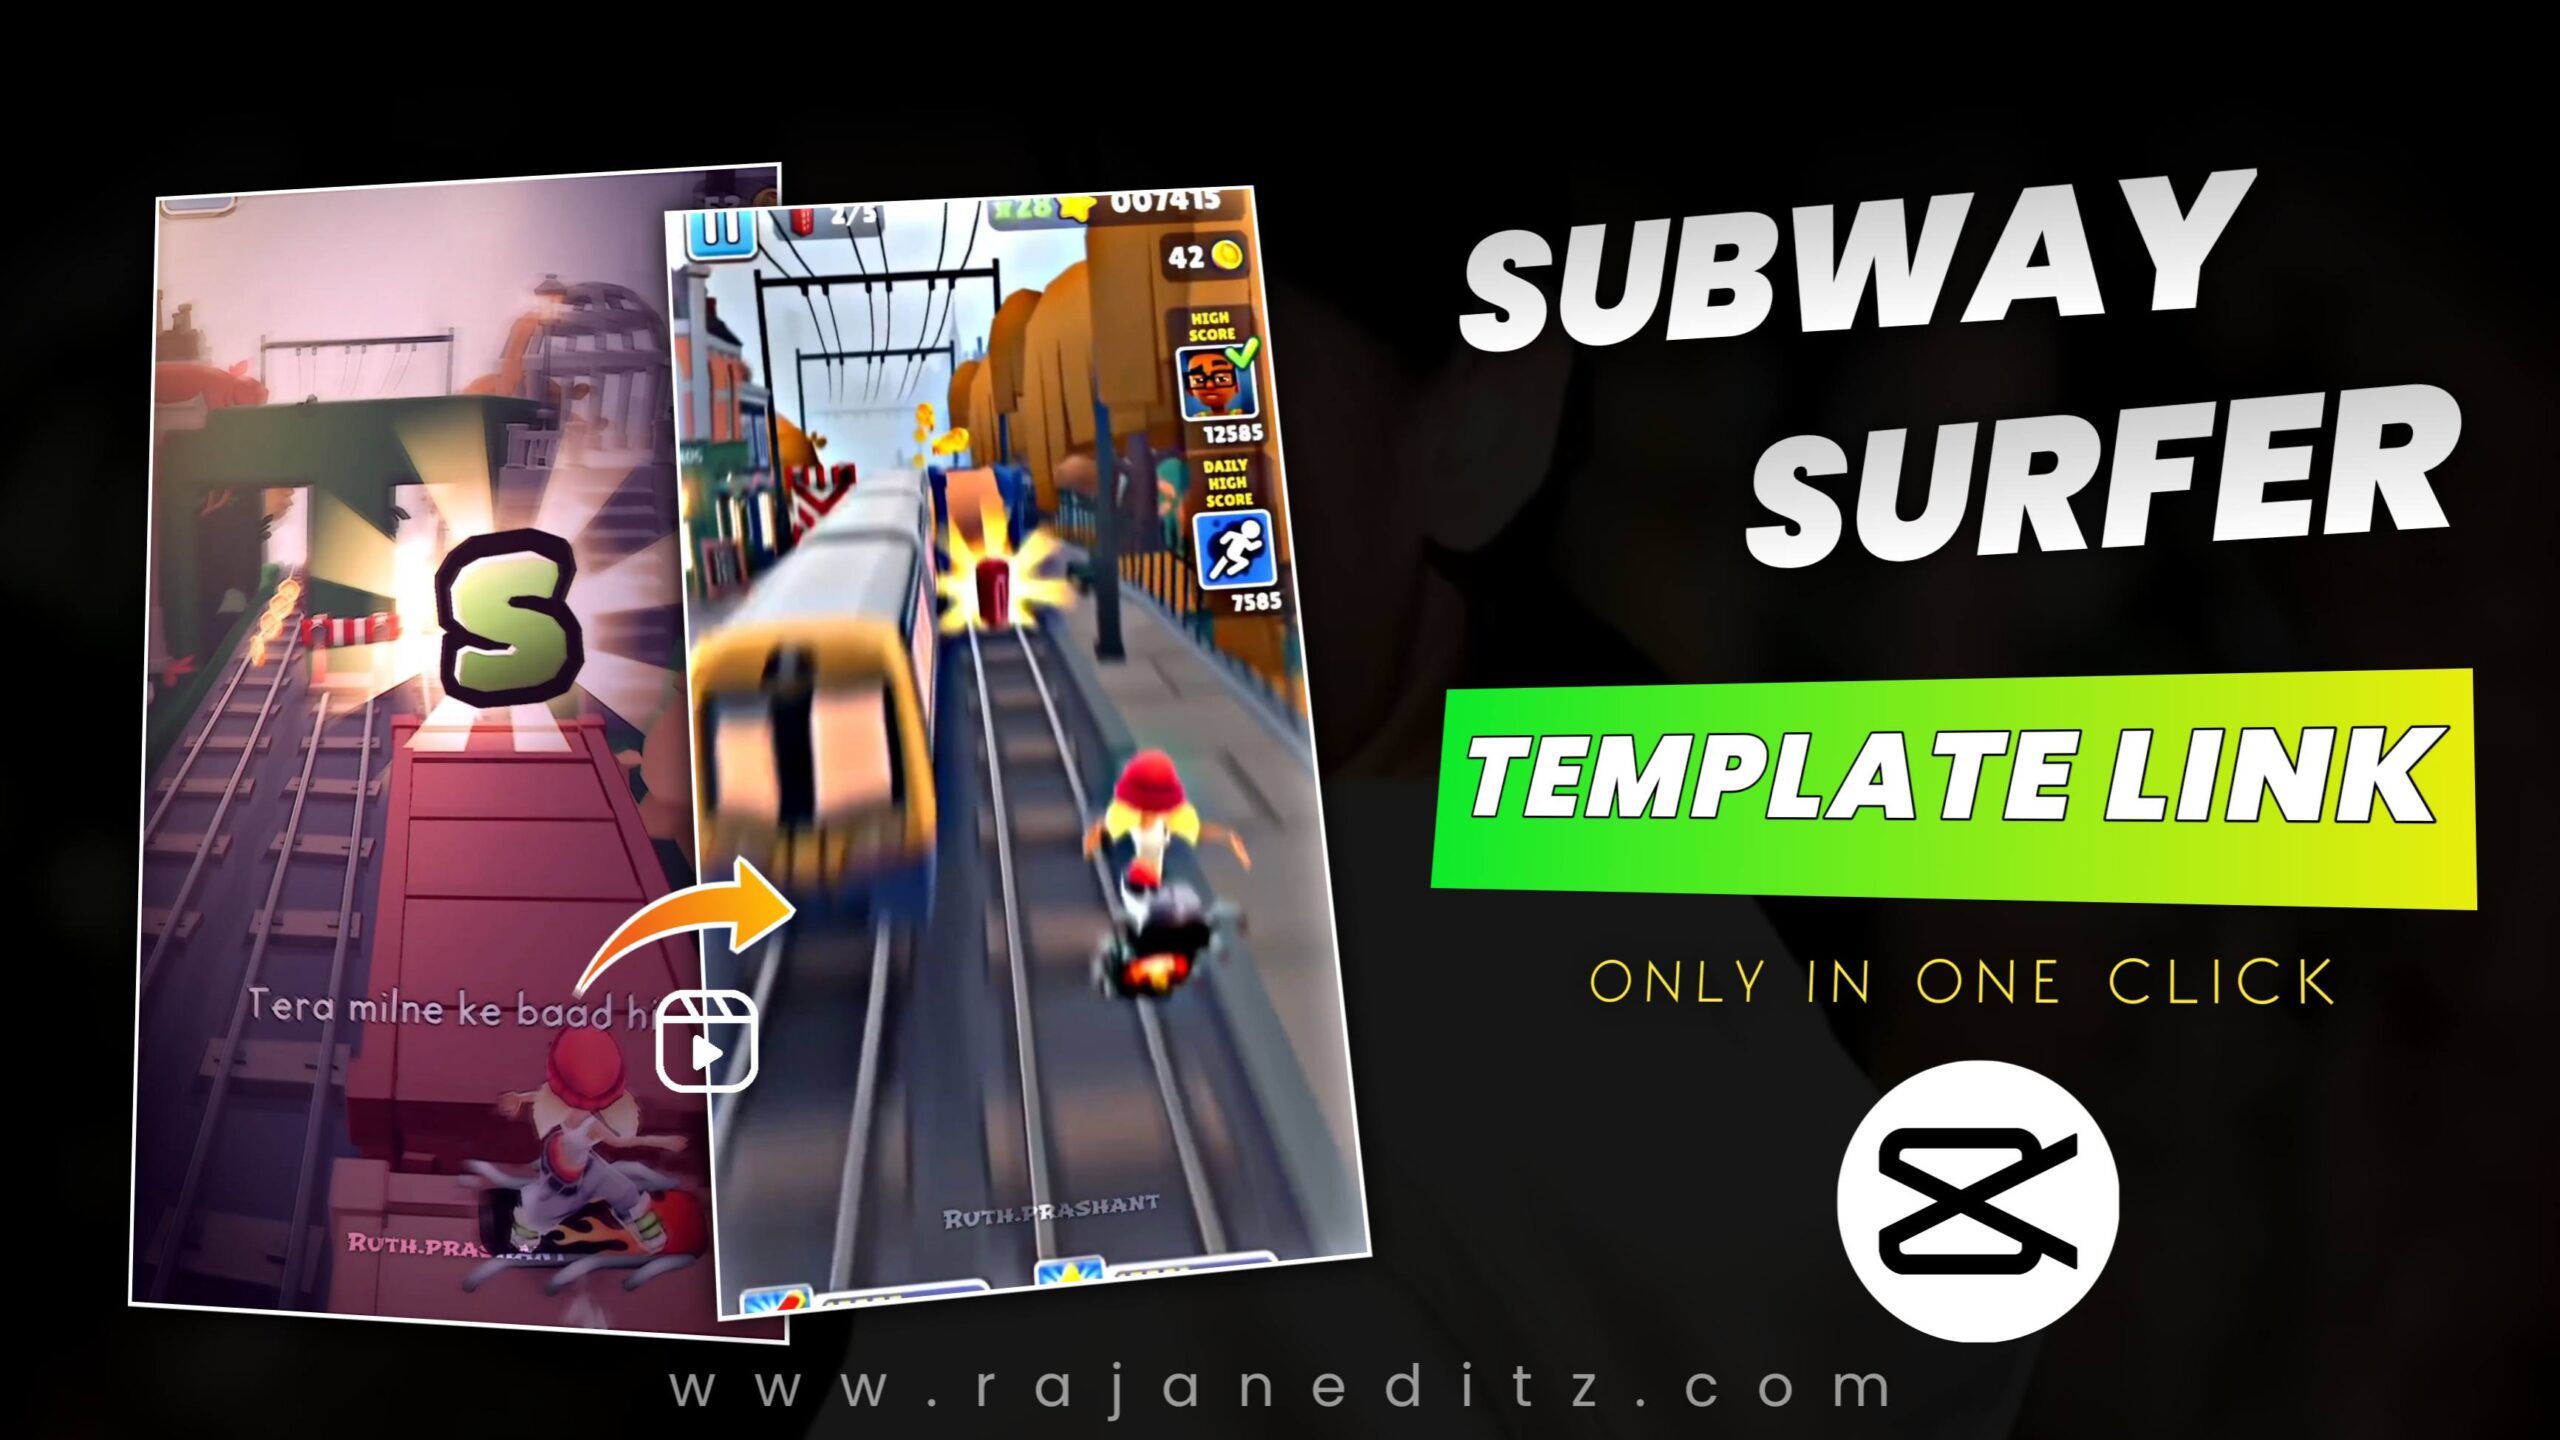 tagbot #subwaysurfers #tutorial #capcut #naag #paravoce #fy #fypシ #fy